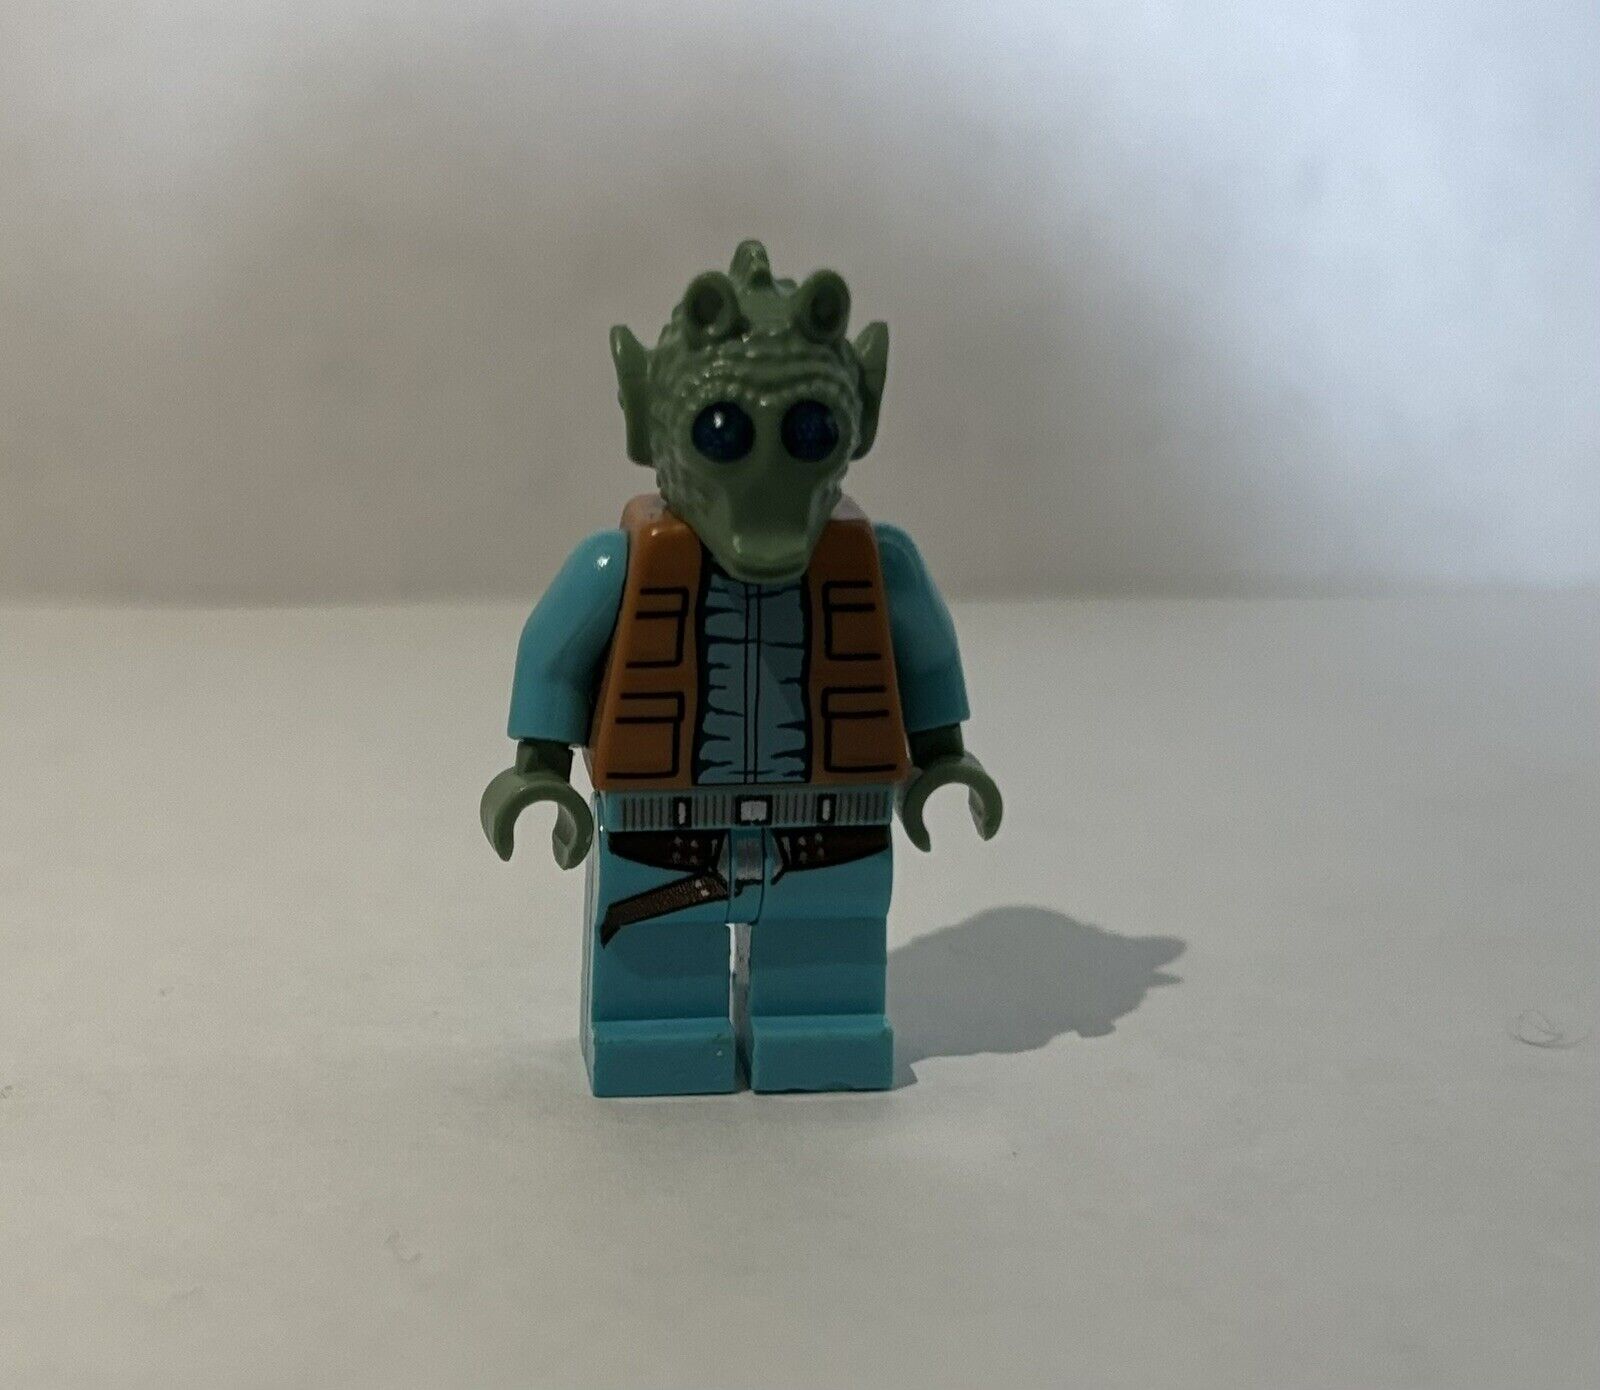 LEGO Star Wars Greedo Minifigure. RARE and EXCLUSIVE to 2 CANTINA SETS 100% NEW